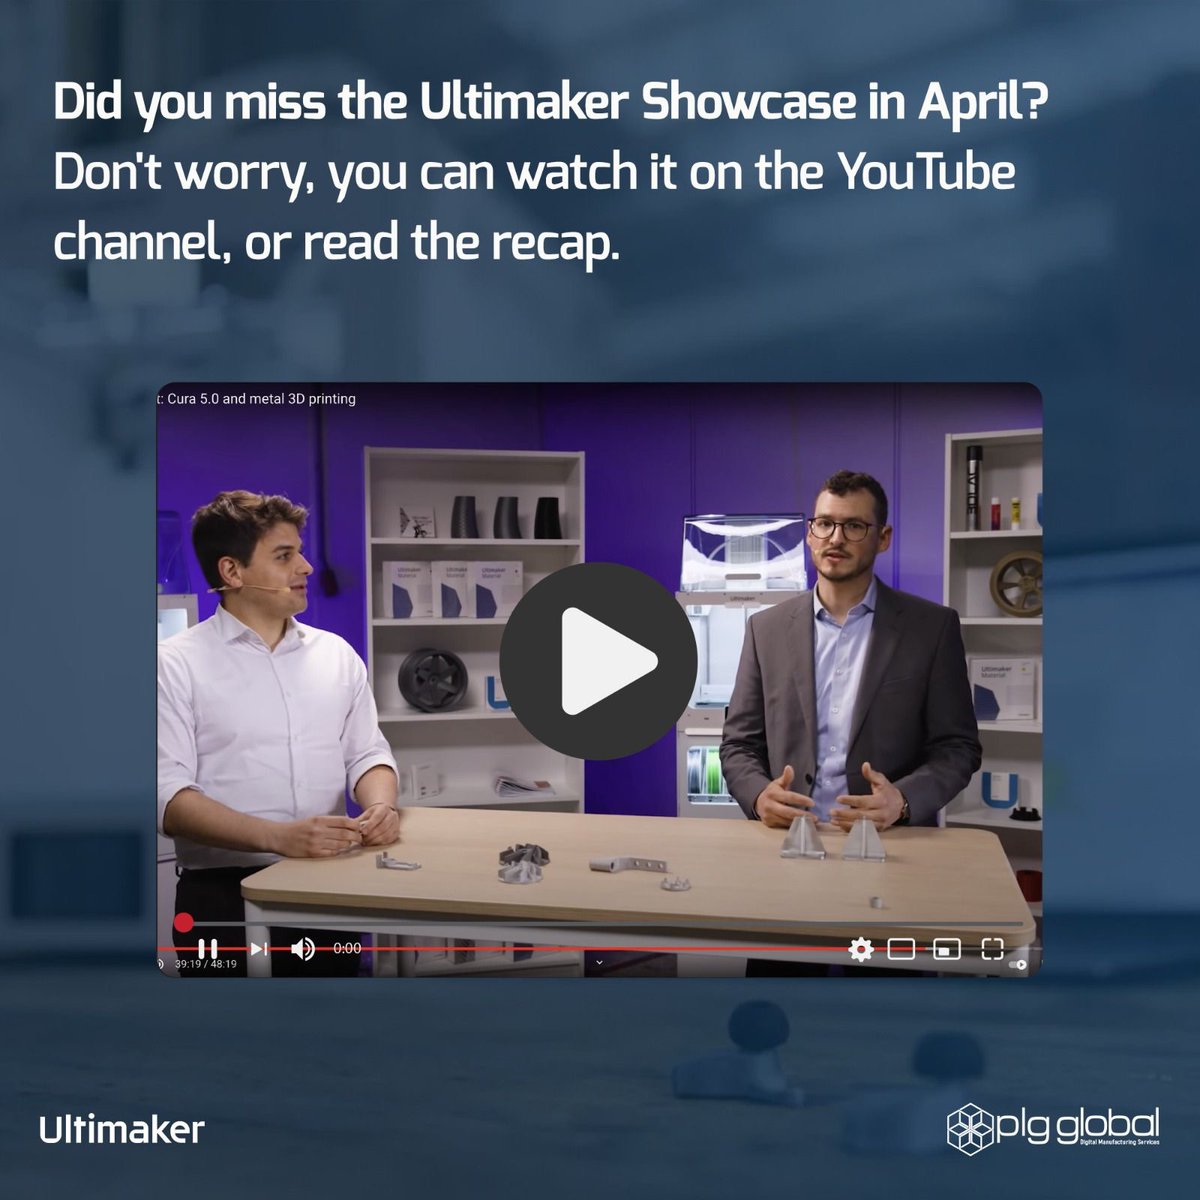 ⏰Time is now for those of you who missed the #Ultimaker showcase! You can read the showcase recap here 👇

ultimaker.com/learn/april-ul… 

#additivemanufacturing #3dprinting #webinar #manufacturinguk #engineeringuk #rapidprototyping #manufacturingservices #FFF #FDM